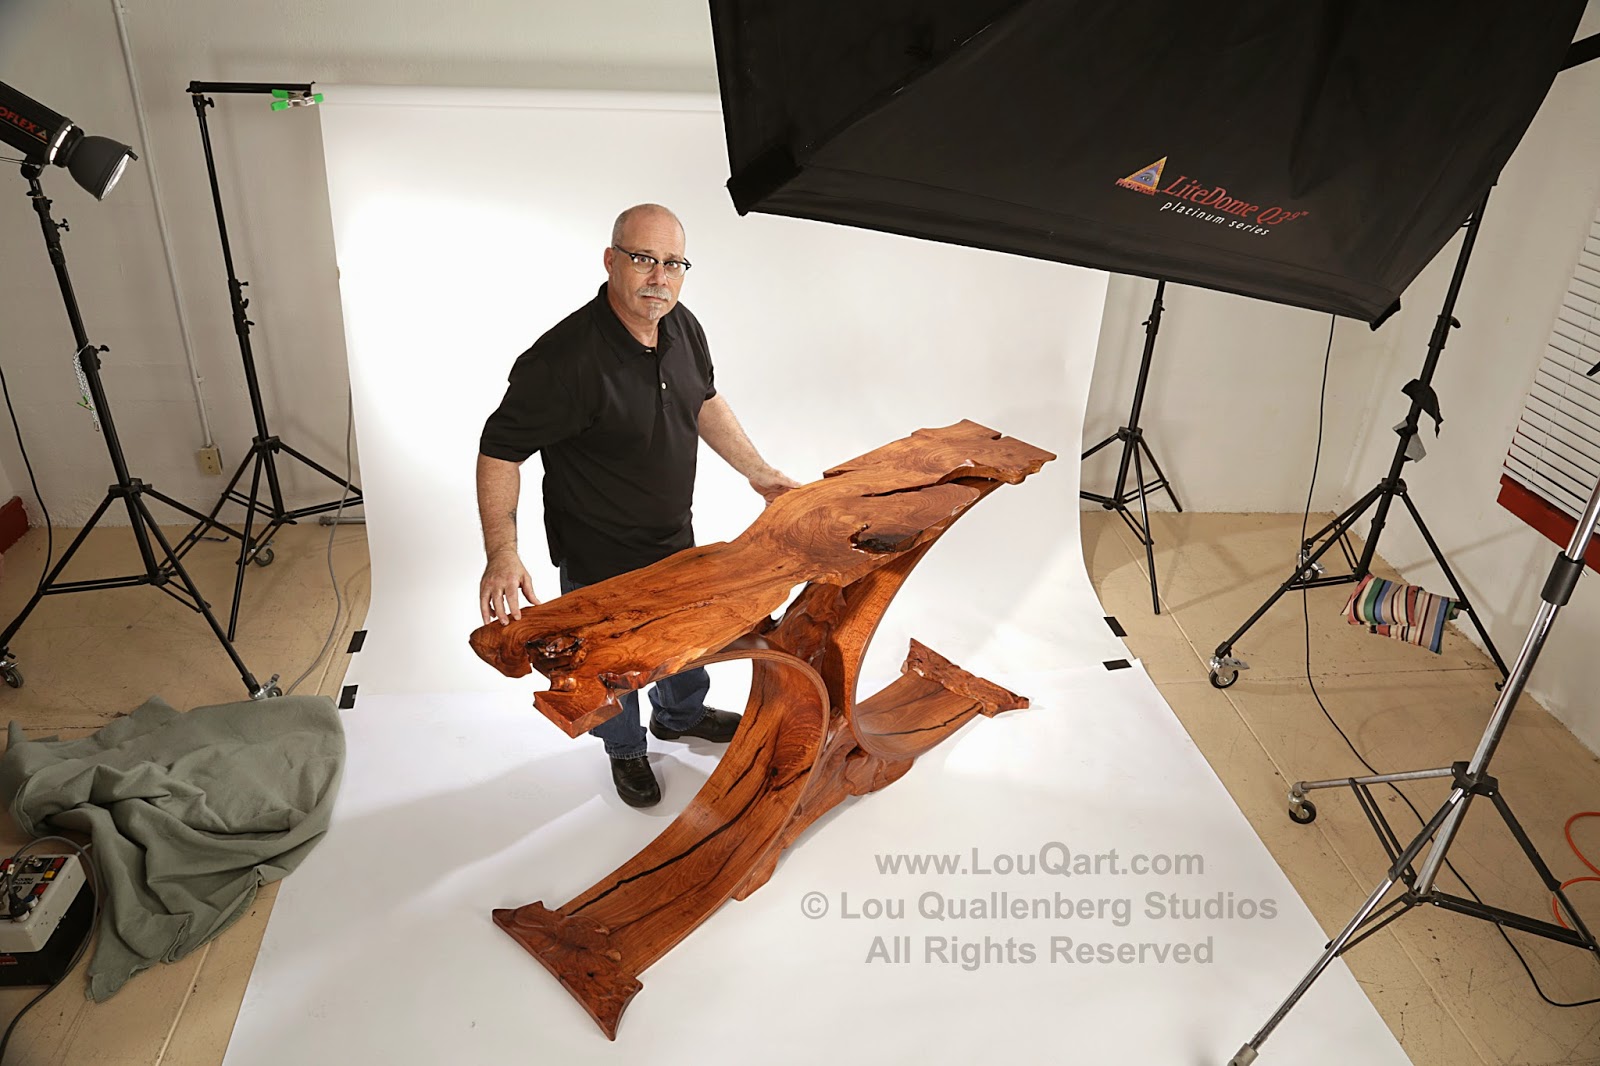 Photographing the "Walker Curve" Mesquite Entry Table with Lou Quallenberg Studios